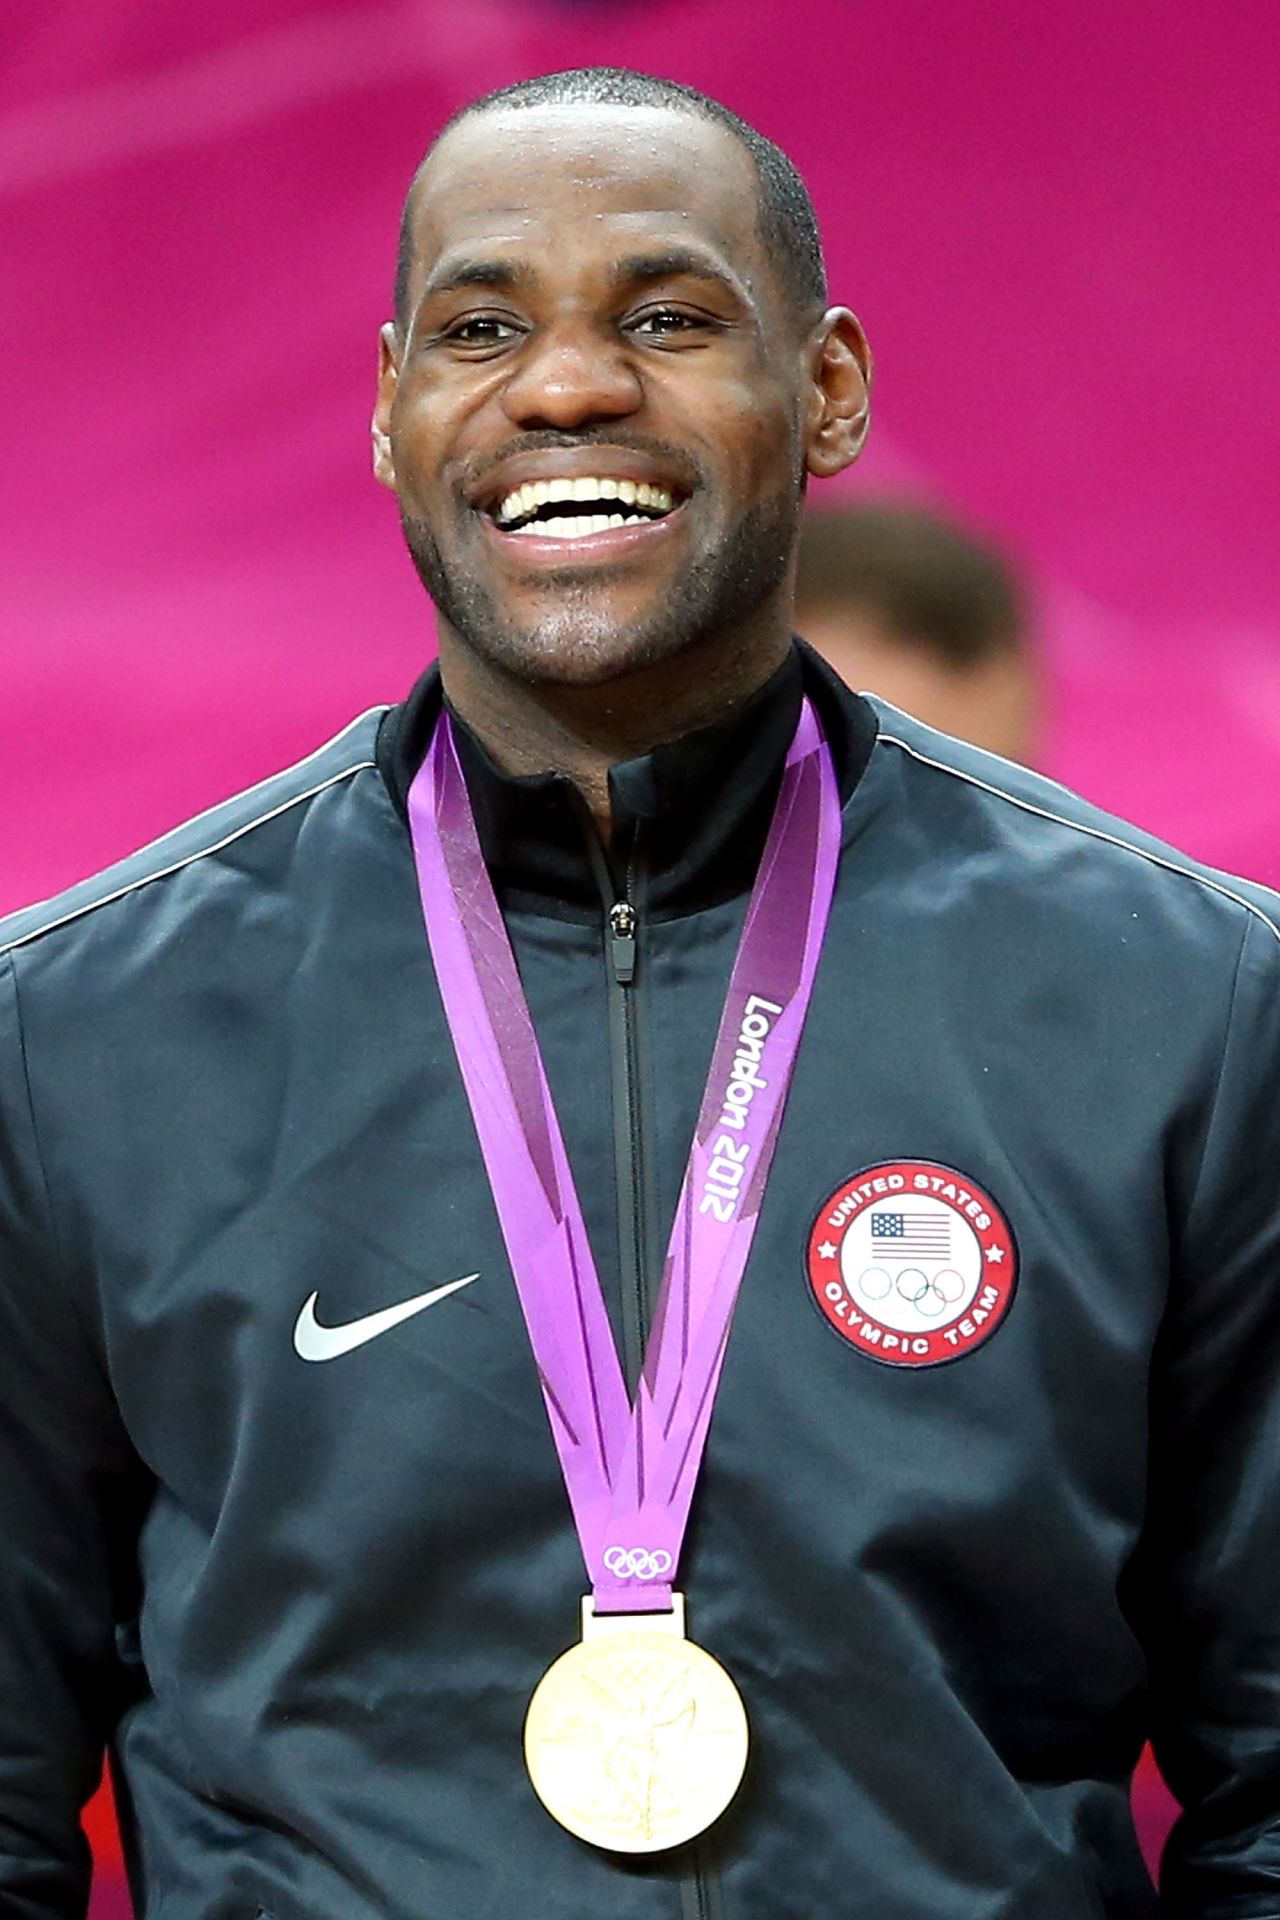 LeBron became the USA's all time top scorer during the 2012 London Olympics as his team beat Spain in the final to take gold, just as they had done four years previously in Beijing.